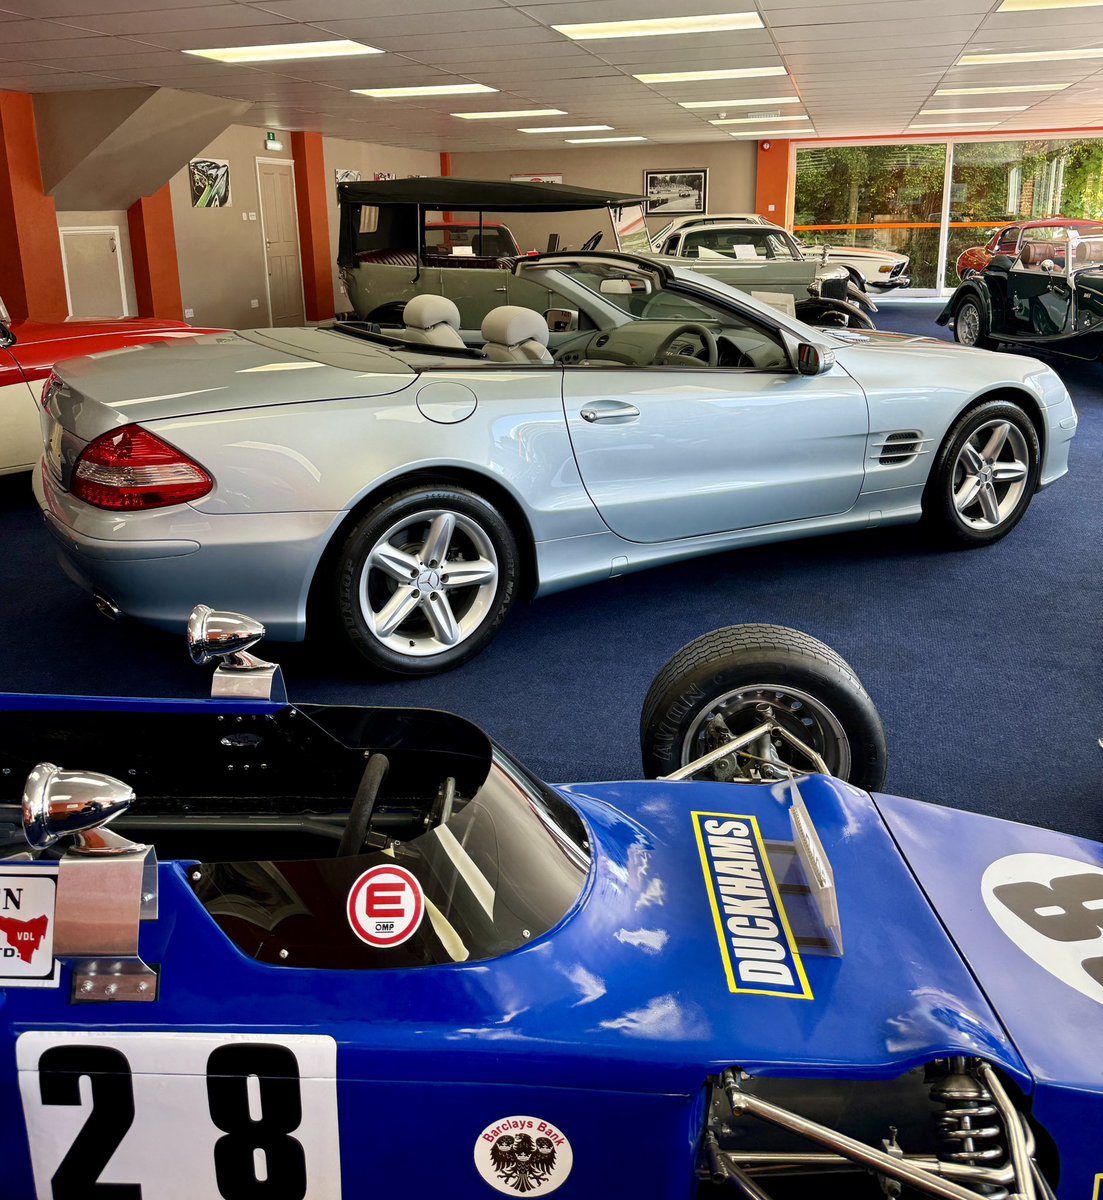 JUST ARRIVED ! An exceptional 2007 Mercedes-Benz SL350 7G-Tronic in rare Tellurite Silver with the desirable option of Panoramic roof which has covered a mere 26,000 miles from new #mercedesbenzsl #nutleysportsprestige